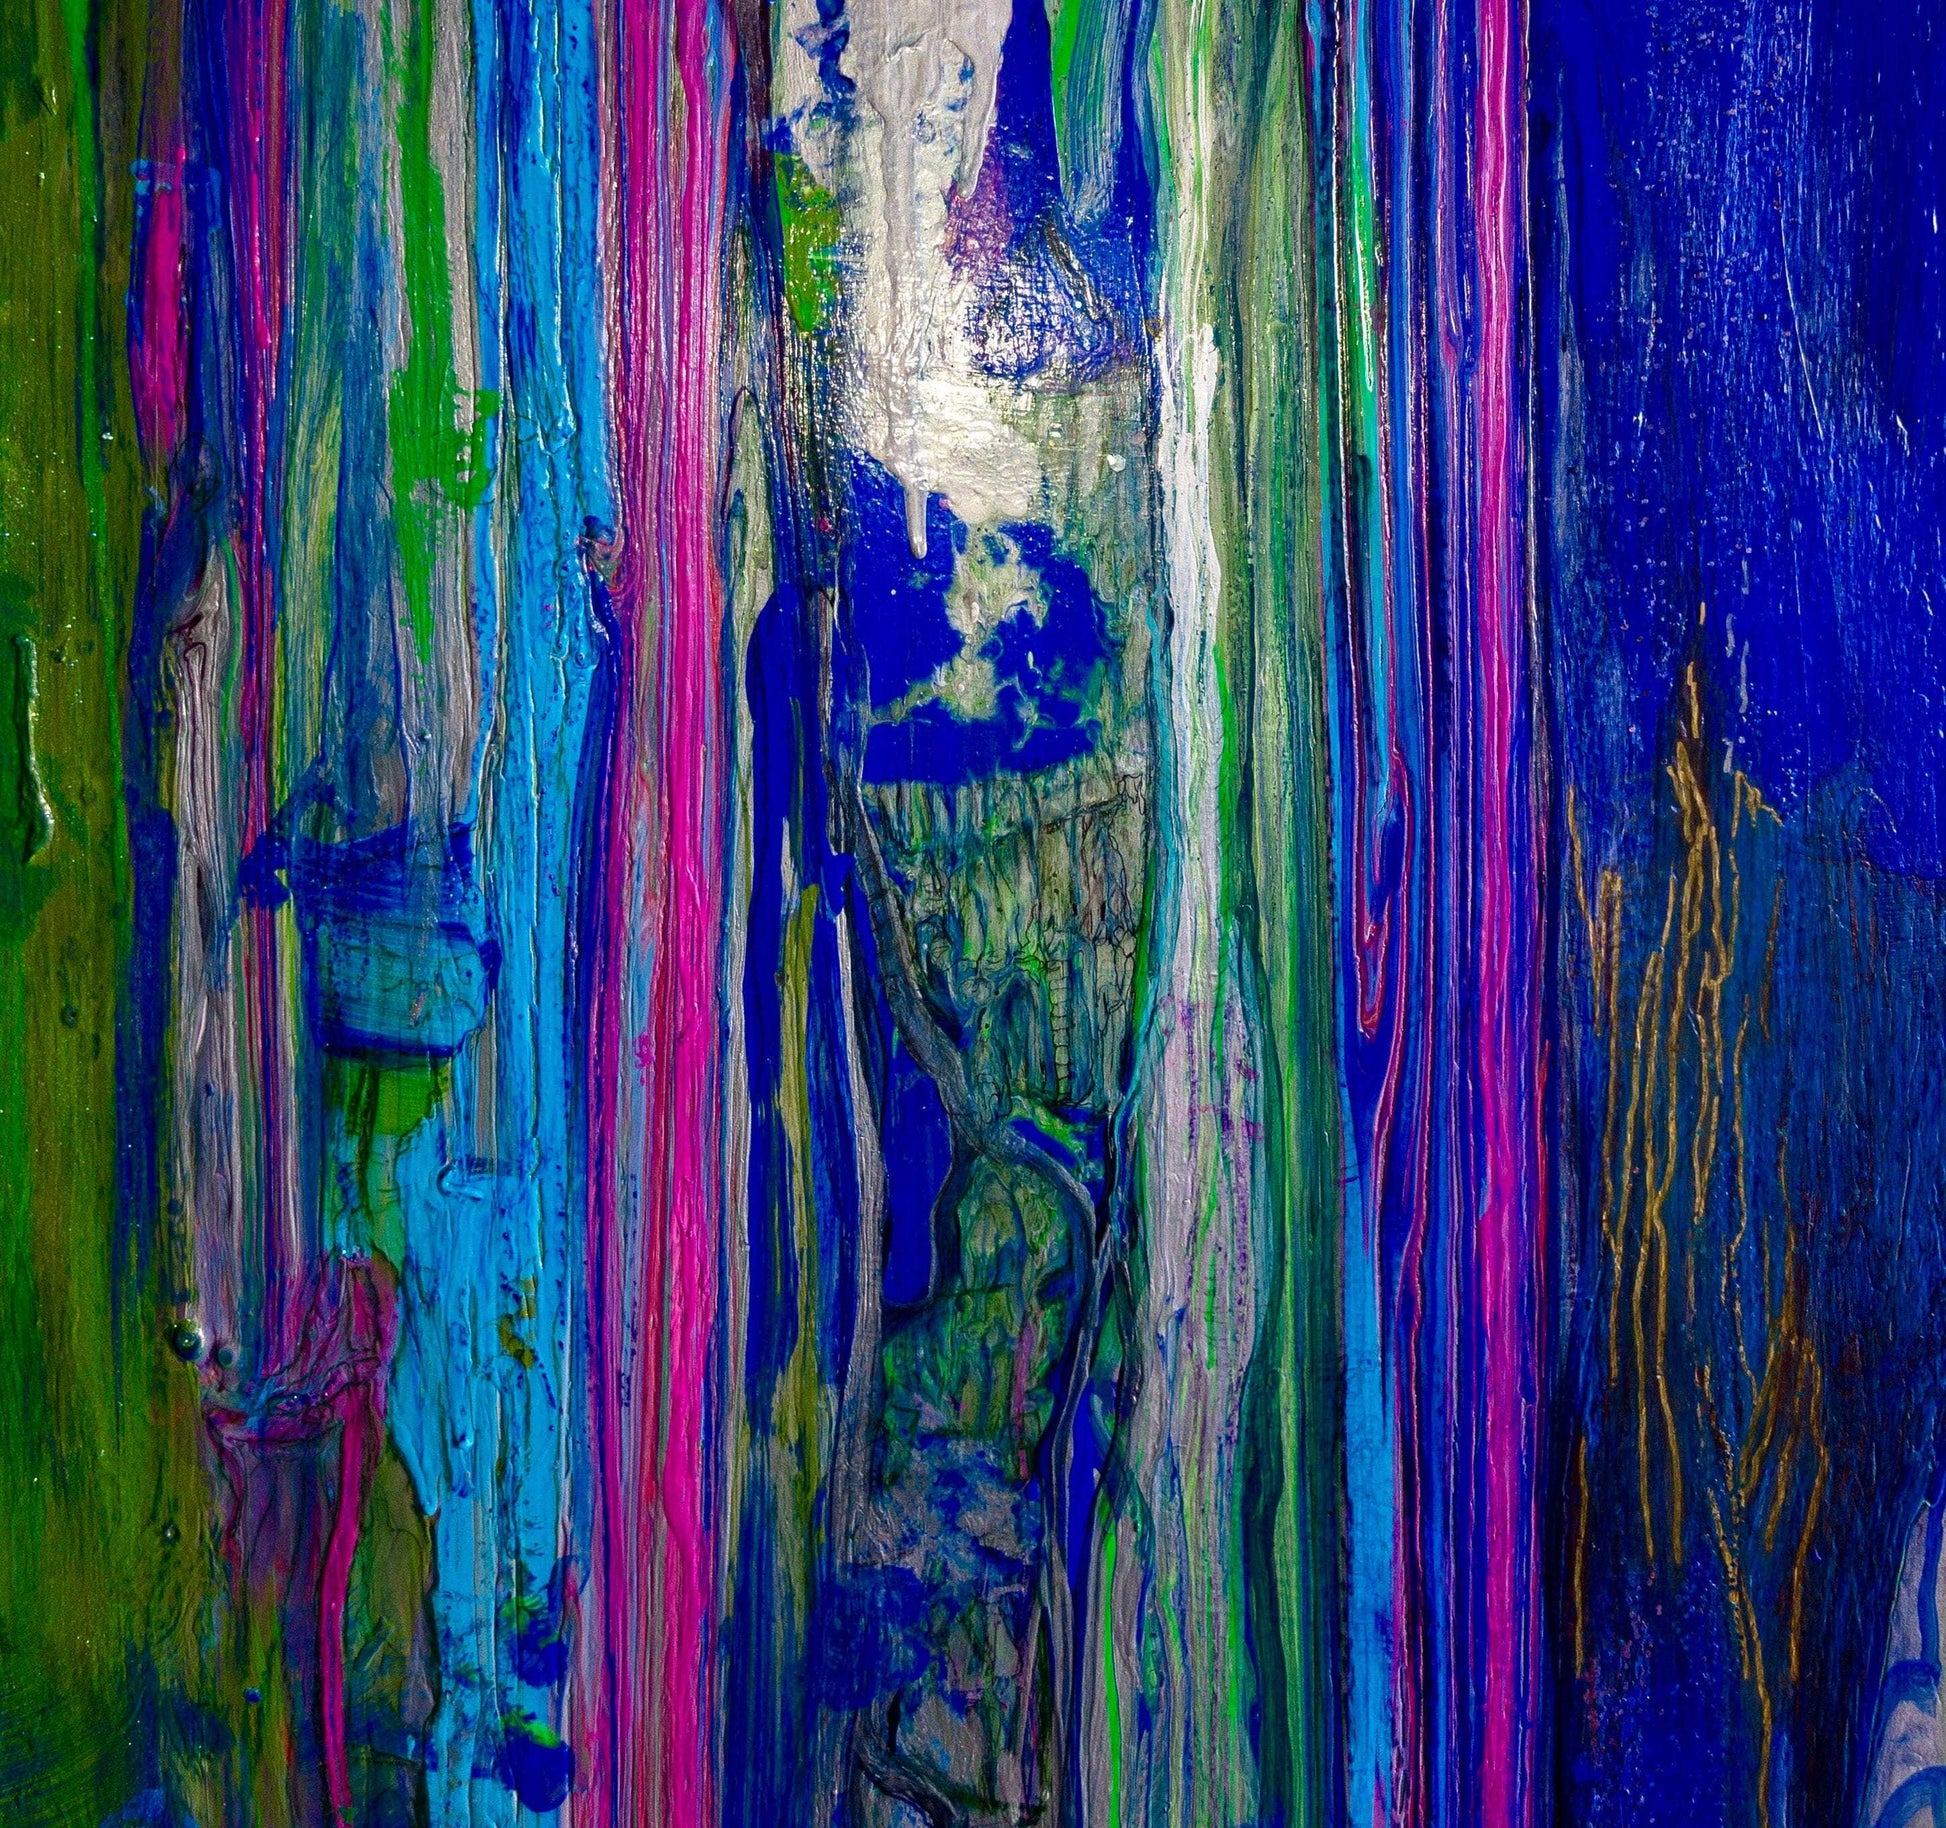 The Other Side - Large, Colorful And Textured, Space, Sparkly And Glossy, Abstract Design On Veneer, Painting By Art with Evie